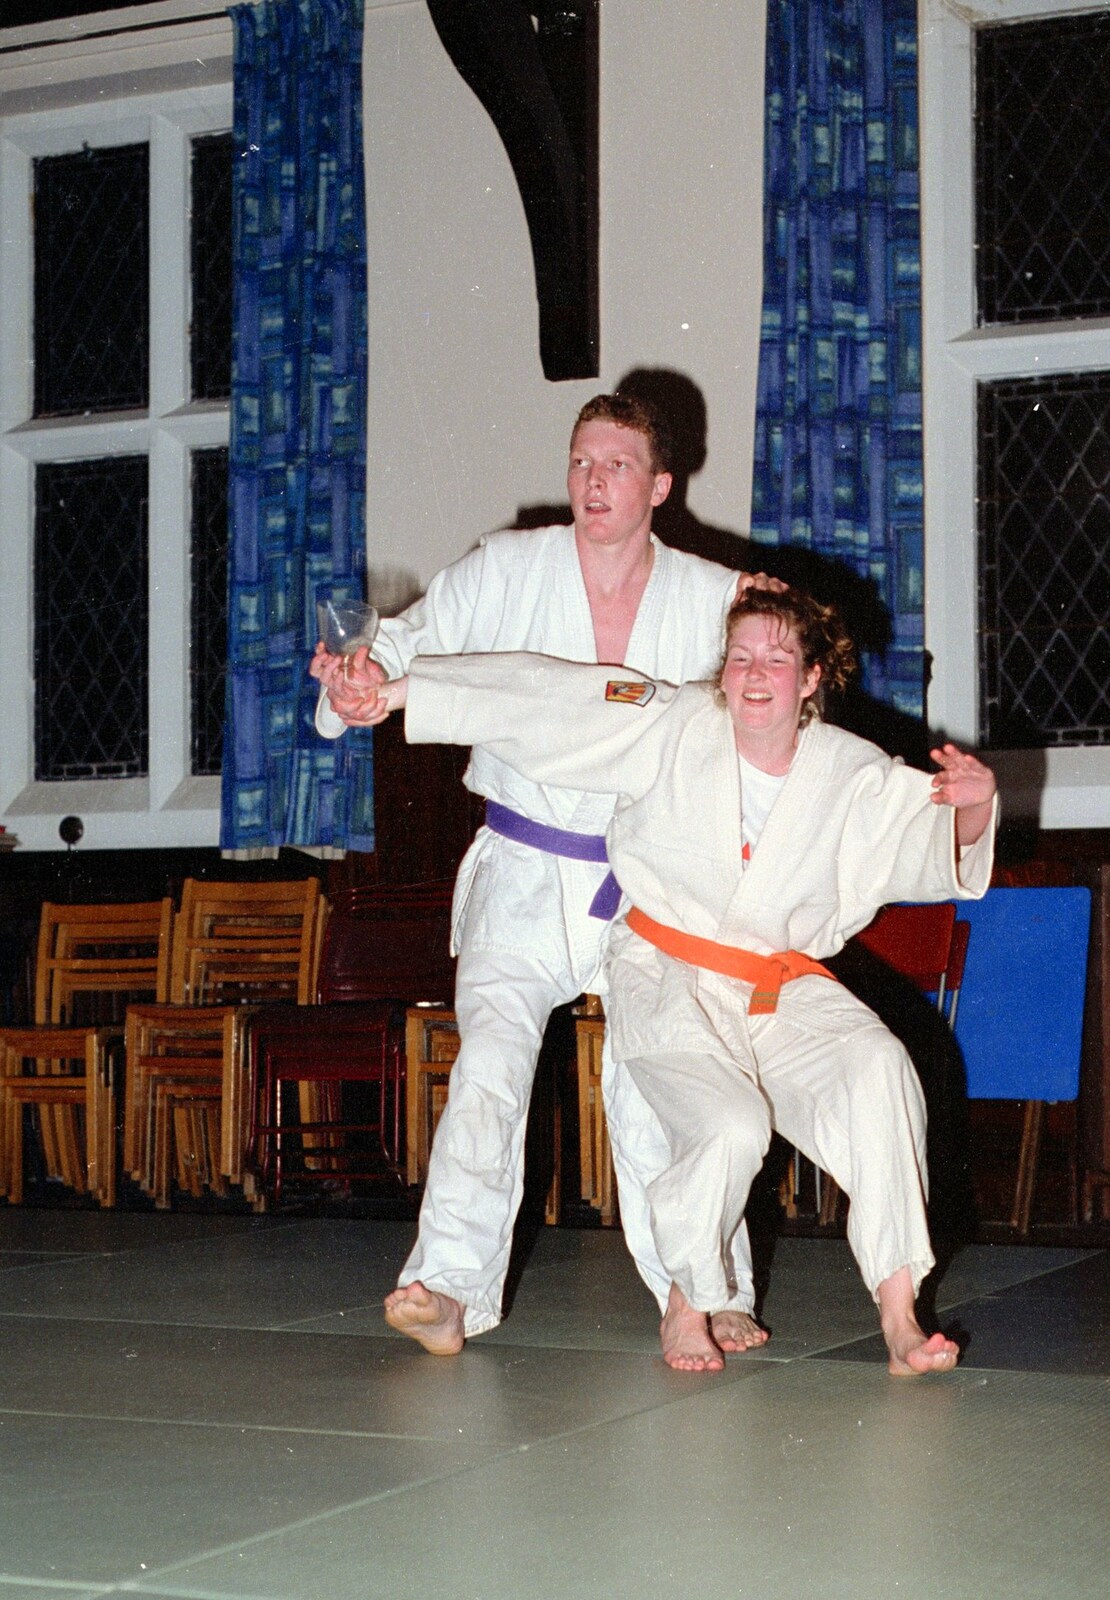 Andy Dobie's Jiu Jitsu group are doing a demonstration in Shelly Hall from Uni: Riki's Barbeque and Dobbs' Jitsu, Plymouth, Devon - 2nd June 1989